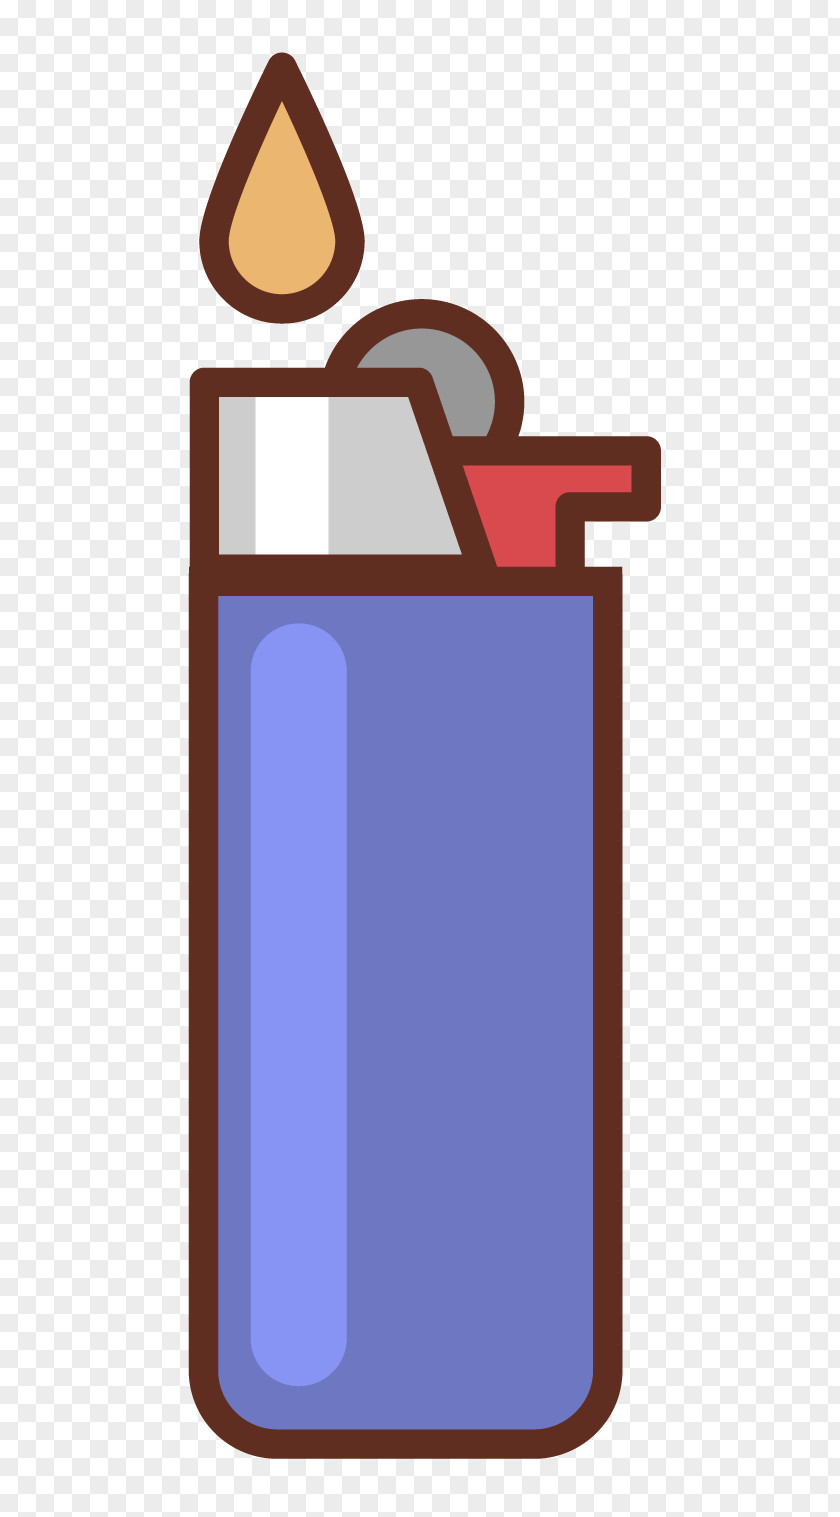 Lighter Pixel Icon PNG Icon, Cartoon clipart PNG